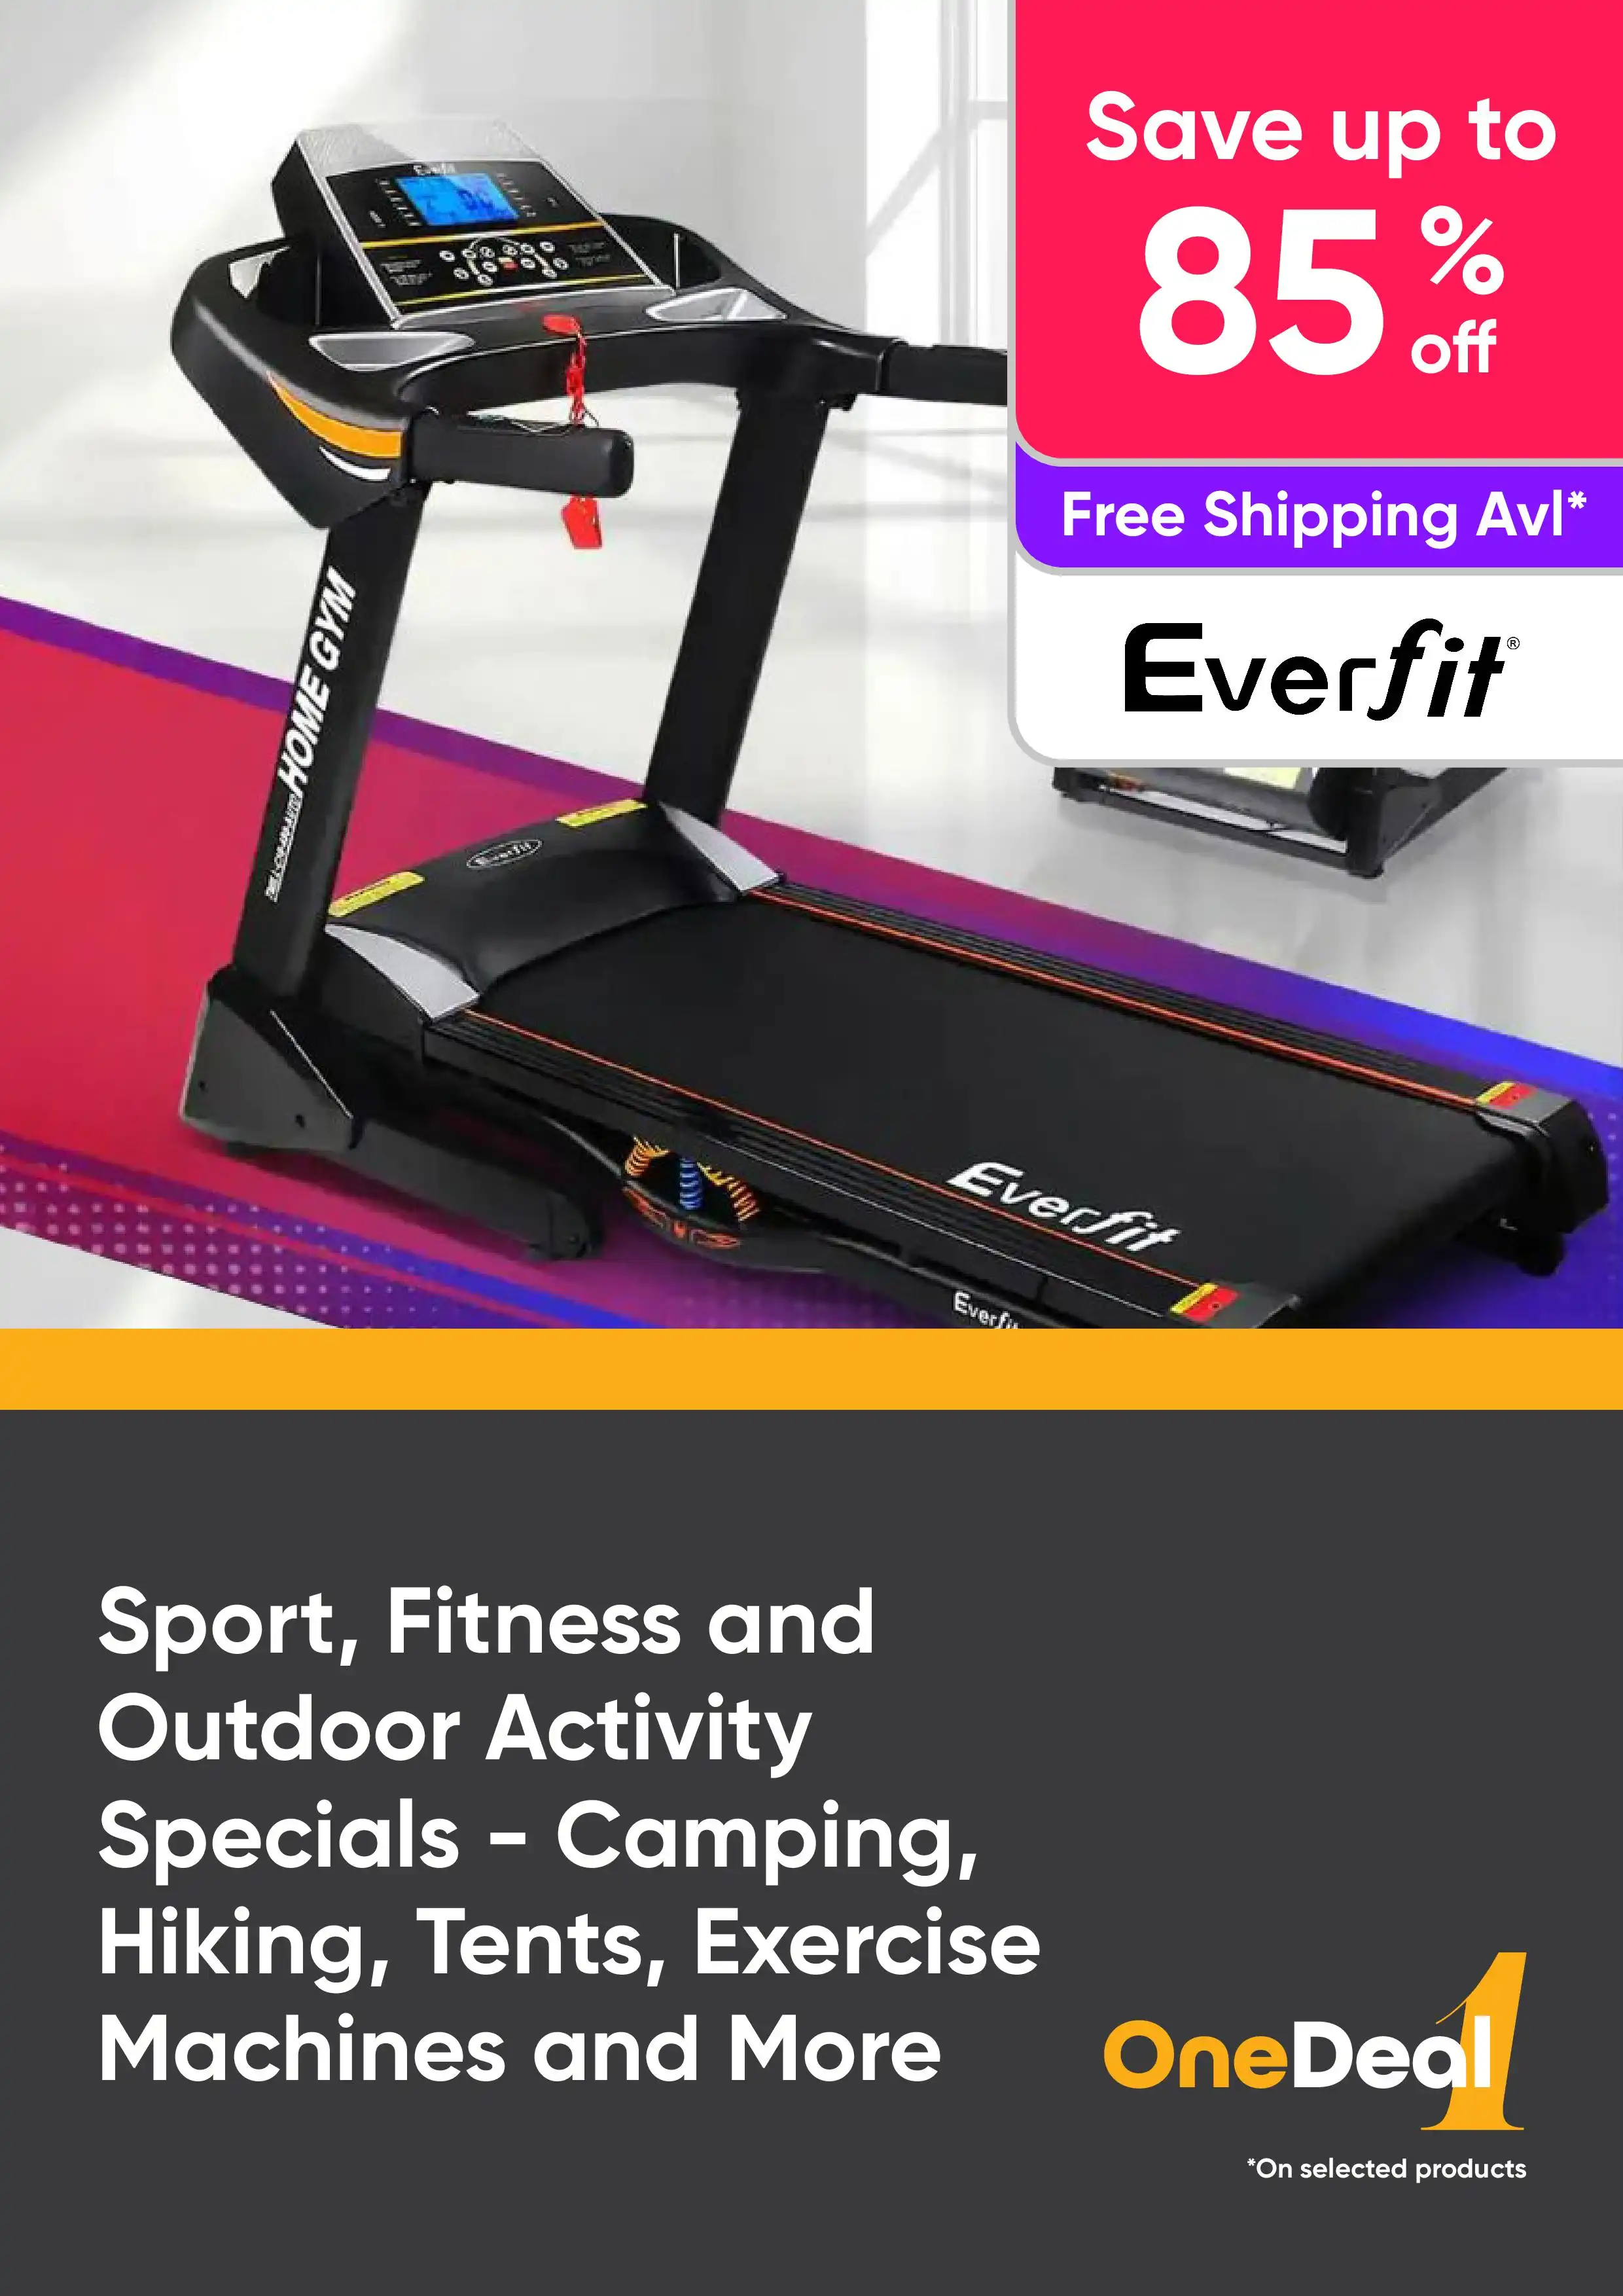 Sports, Fitness and Outdoor Activities Specials - Camping, Hiking, Tents, Exercise Machines and More - Save up to 85% Off